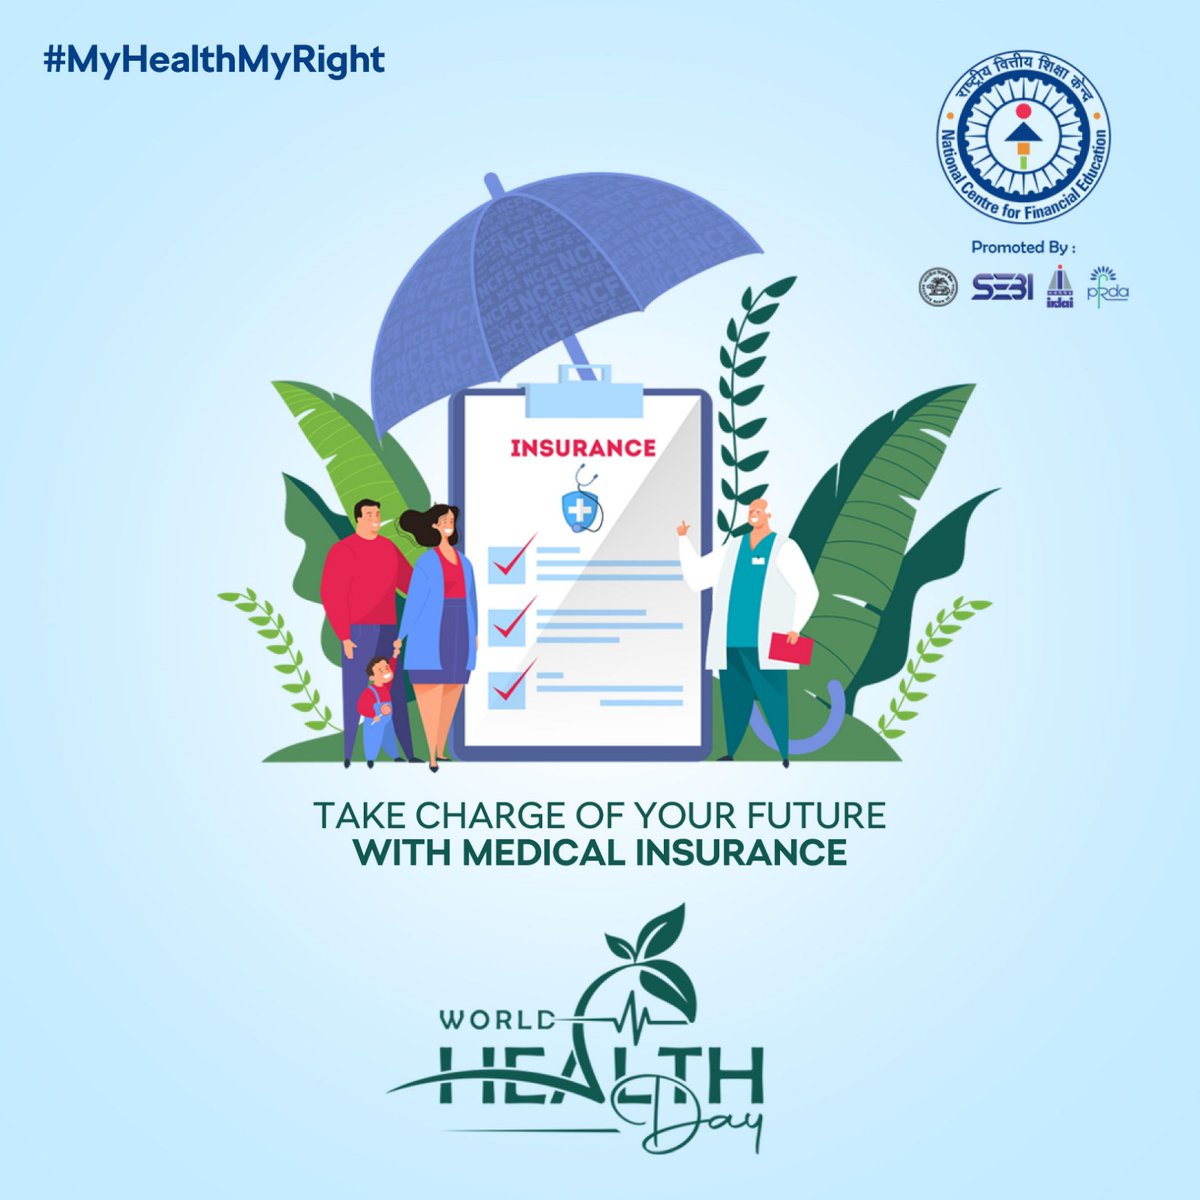 Today, let's celebrate World Health Day by prioritizing wellness for all. Let's strive for equitable access to healthcare, promote healthy lifestyles, and support mental well-being. Together, we can build healthier communities and a brighter future for everyone.